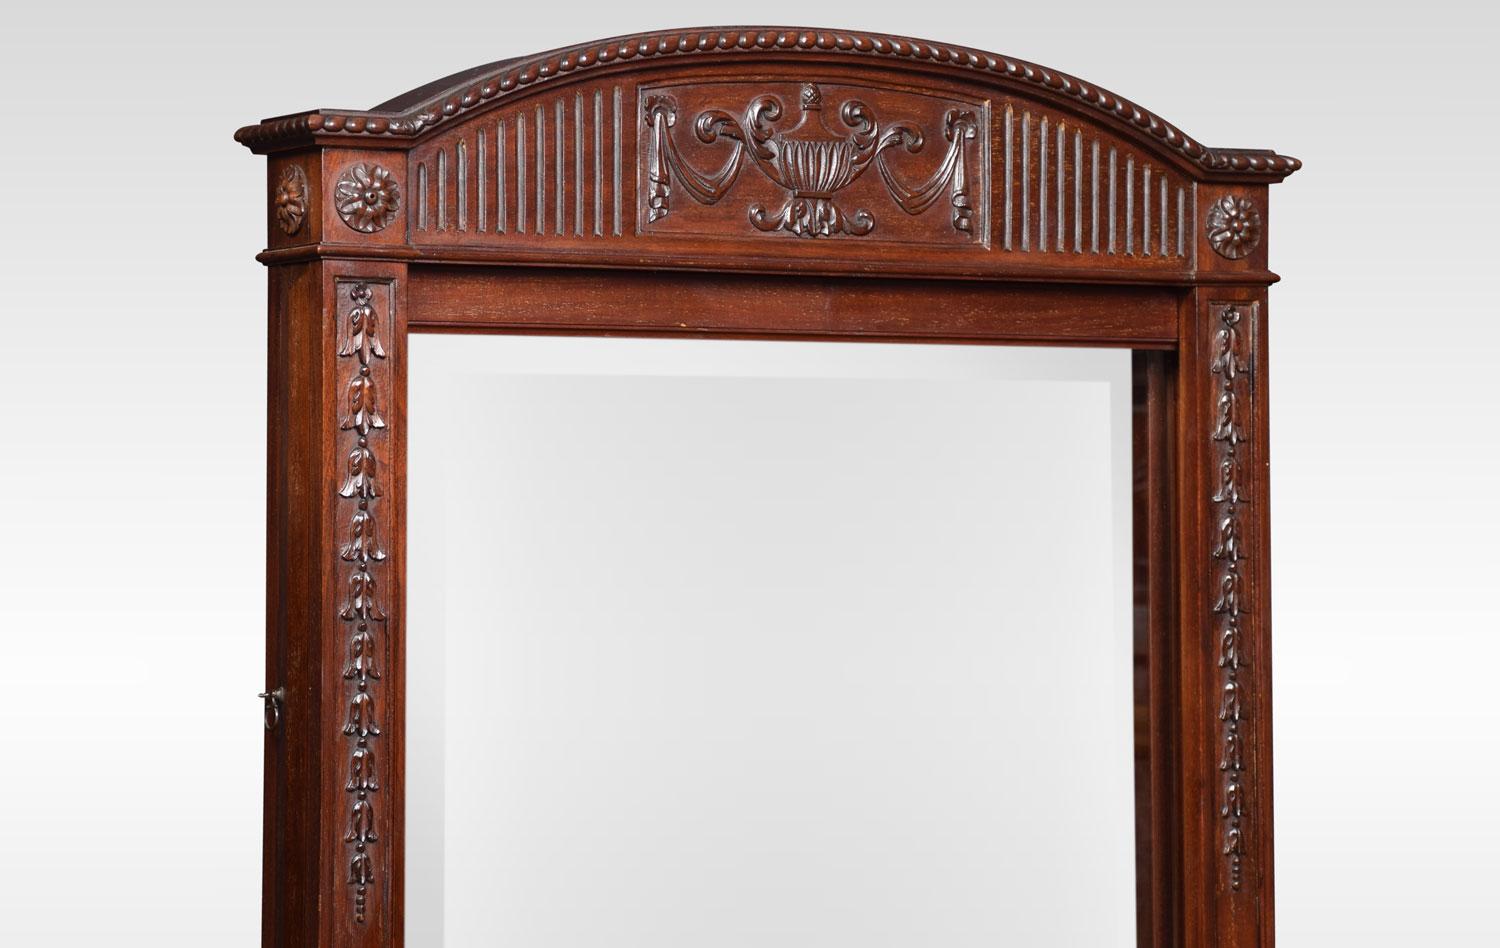 Adam Revival mahogany fire screen, the carved top rail with urn and bellflower carved decoration. The large central beveled glass panel having unusual sliding pull-out ends. All raised up on acanthus carved splayed legs.

Dimensions:
Height 45.5